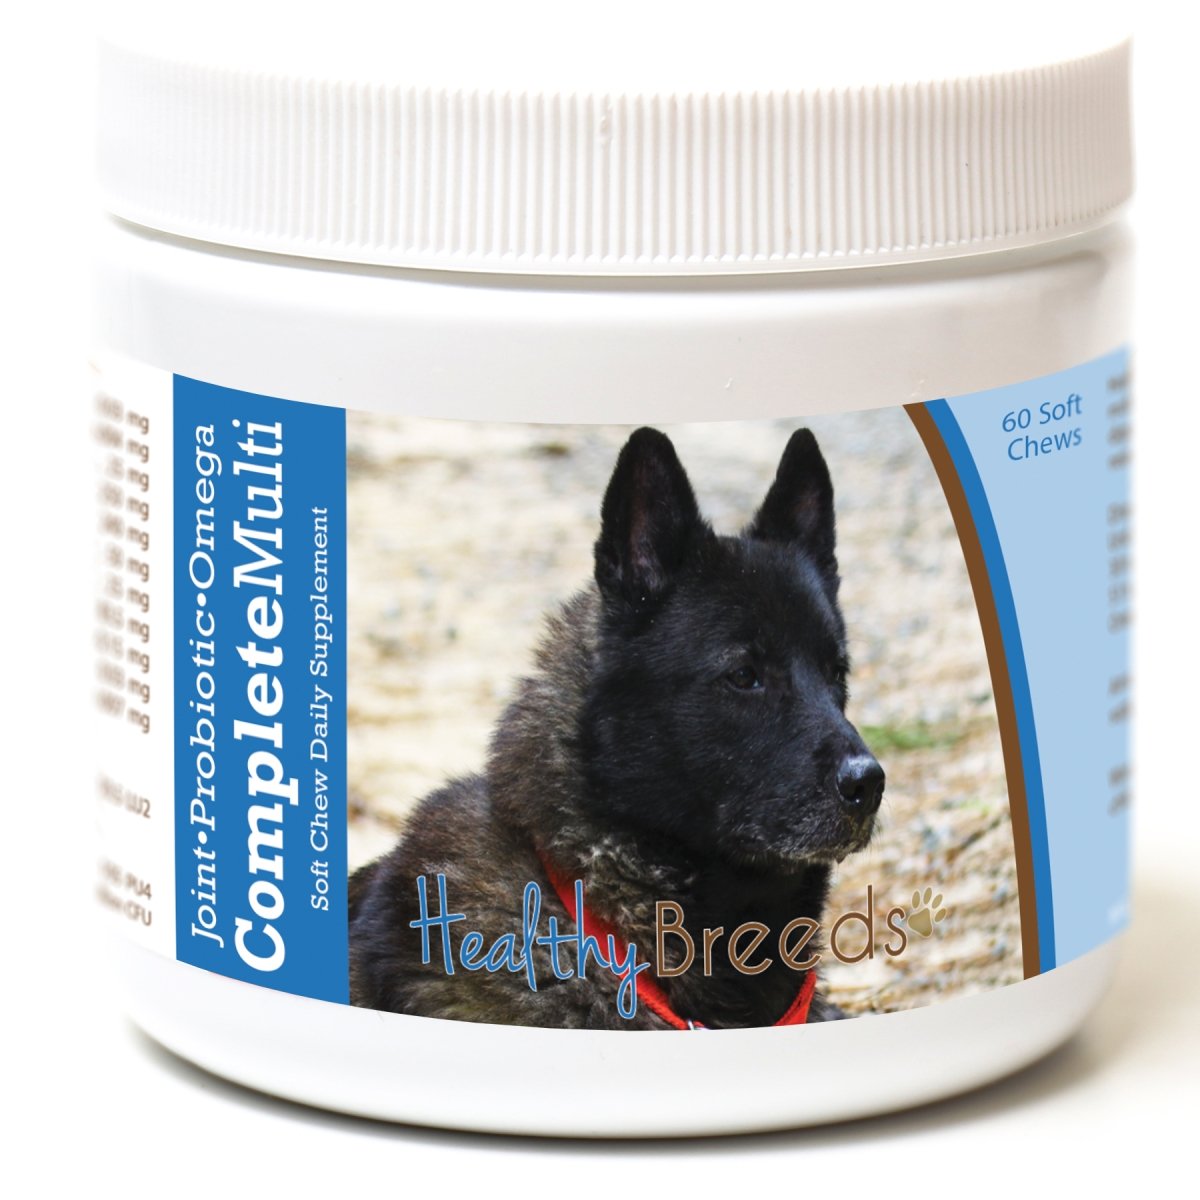 Picture of Healthy Breeds 192959008562 Norwegian Elkhound All in One Multivitamin Soft Chew - 60 Count